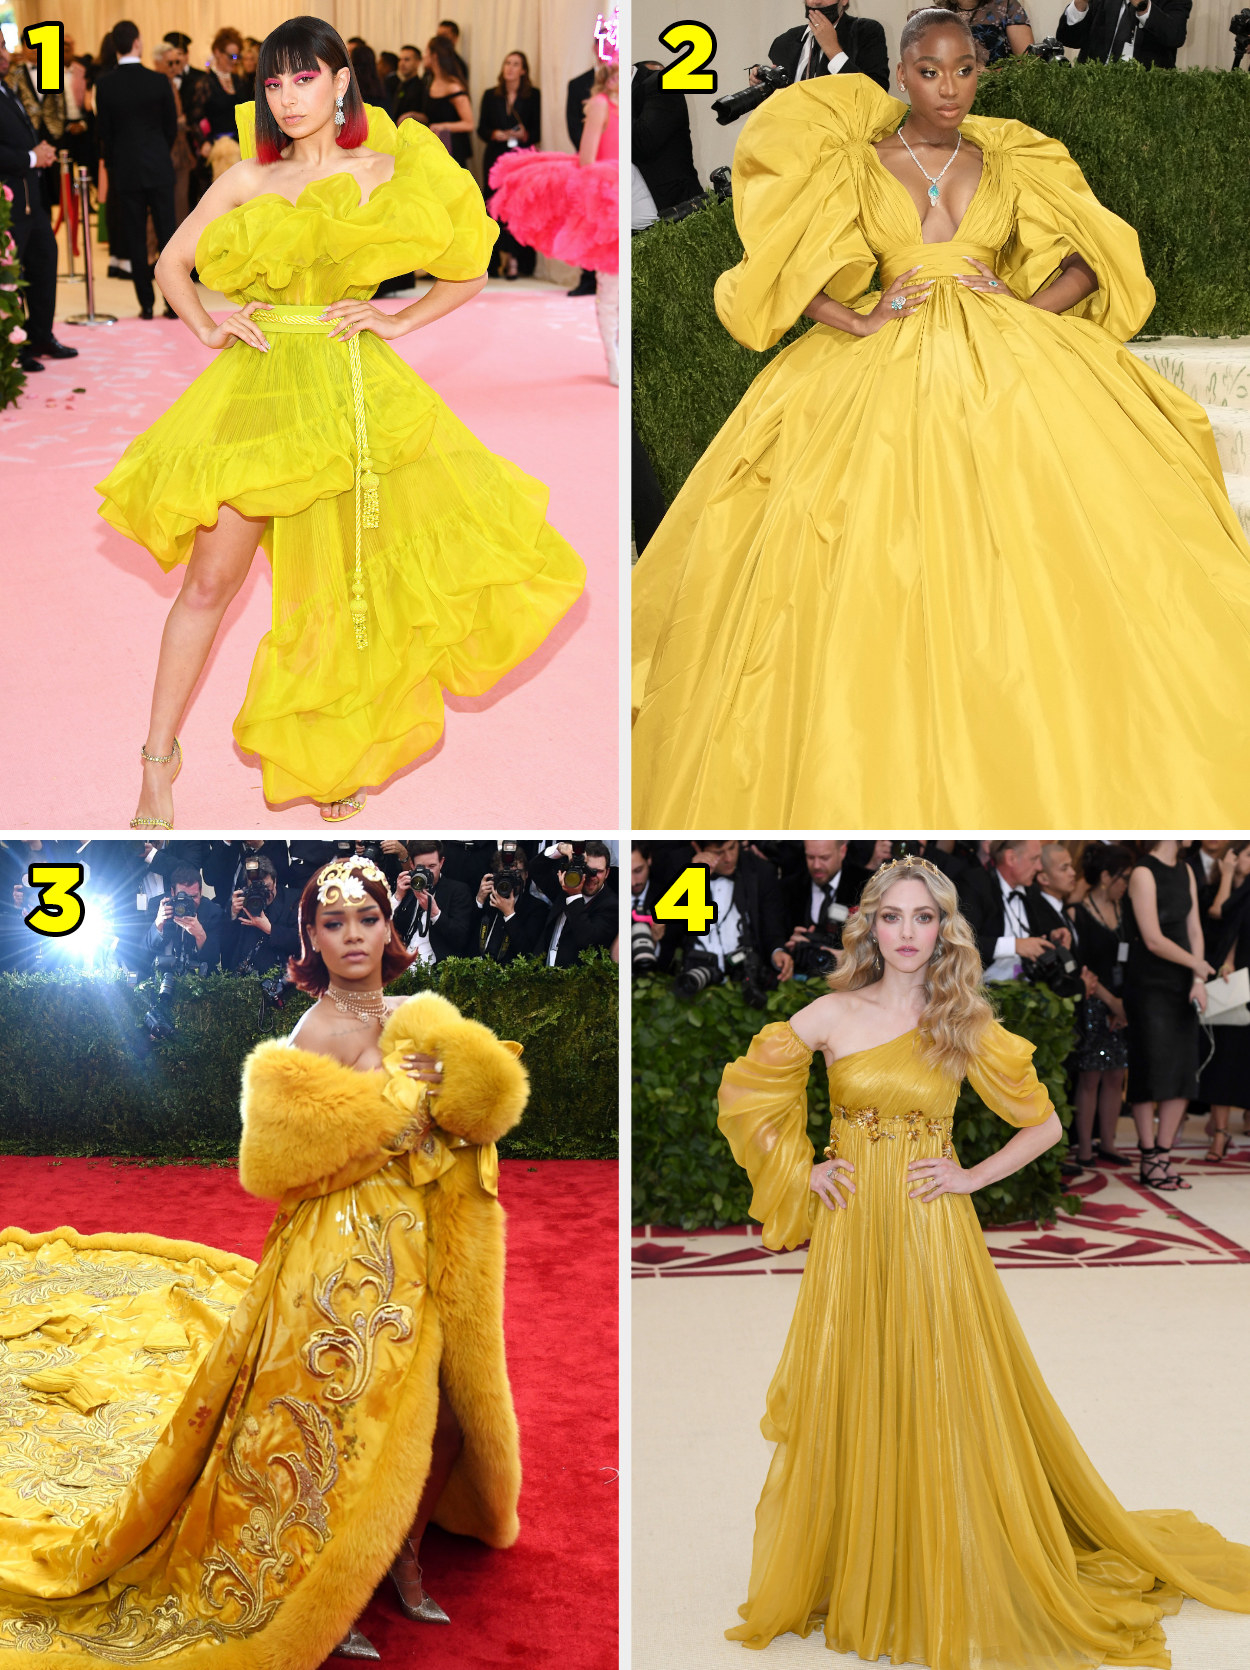 1. Asymmetrical strapless gown with giant ruffles. 2. Giant ballgown with poofy sleeves. 3. A fur coat with a huge train and ornate detailing. 4. One shoulder goddess style gown with a cinched waist and crown.